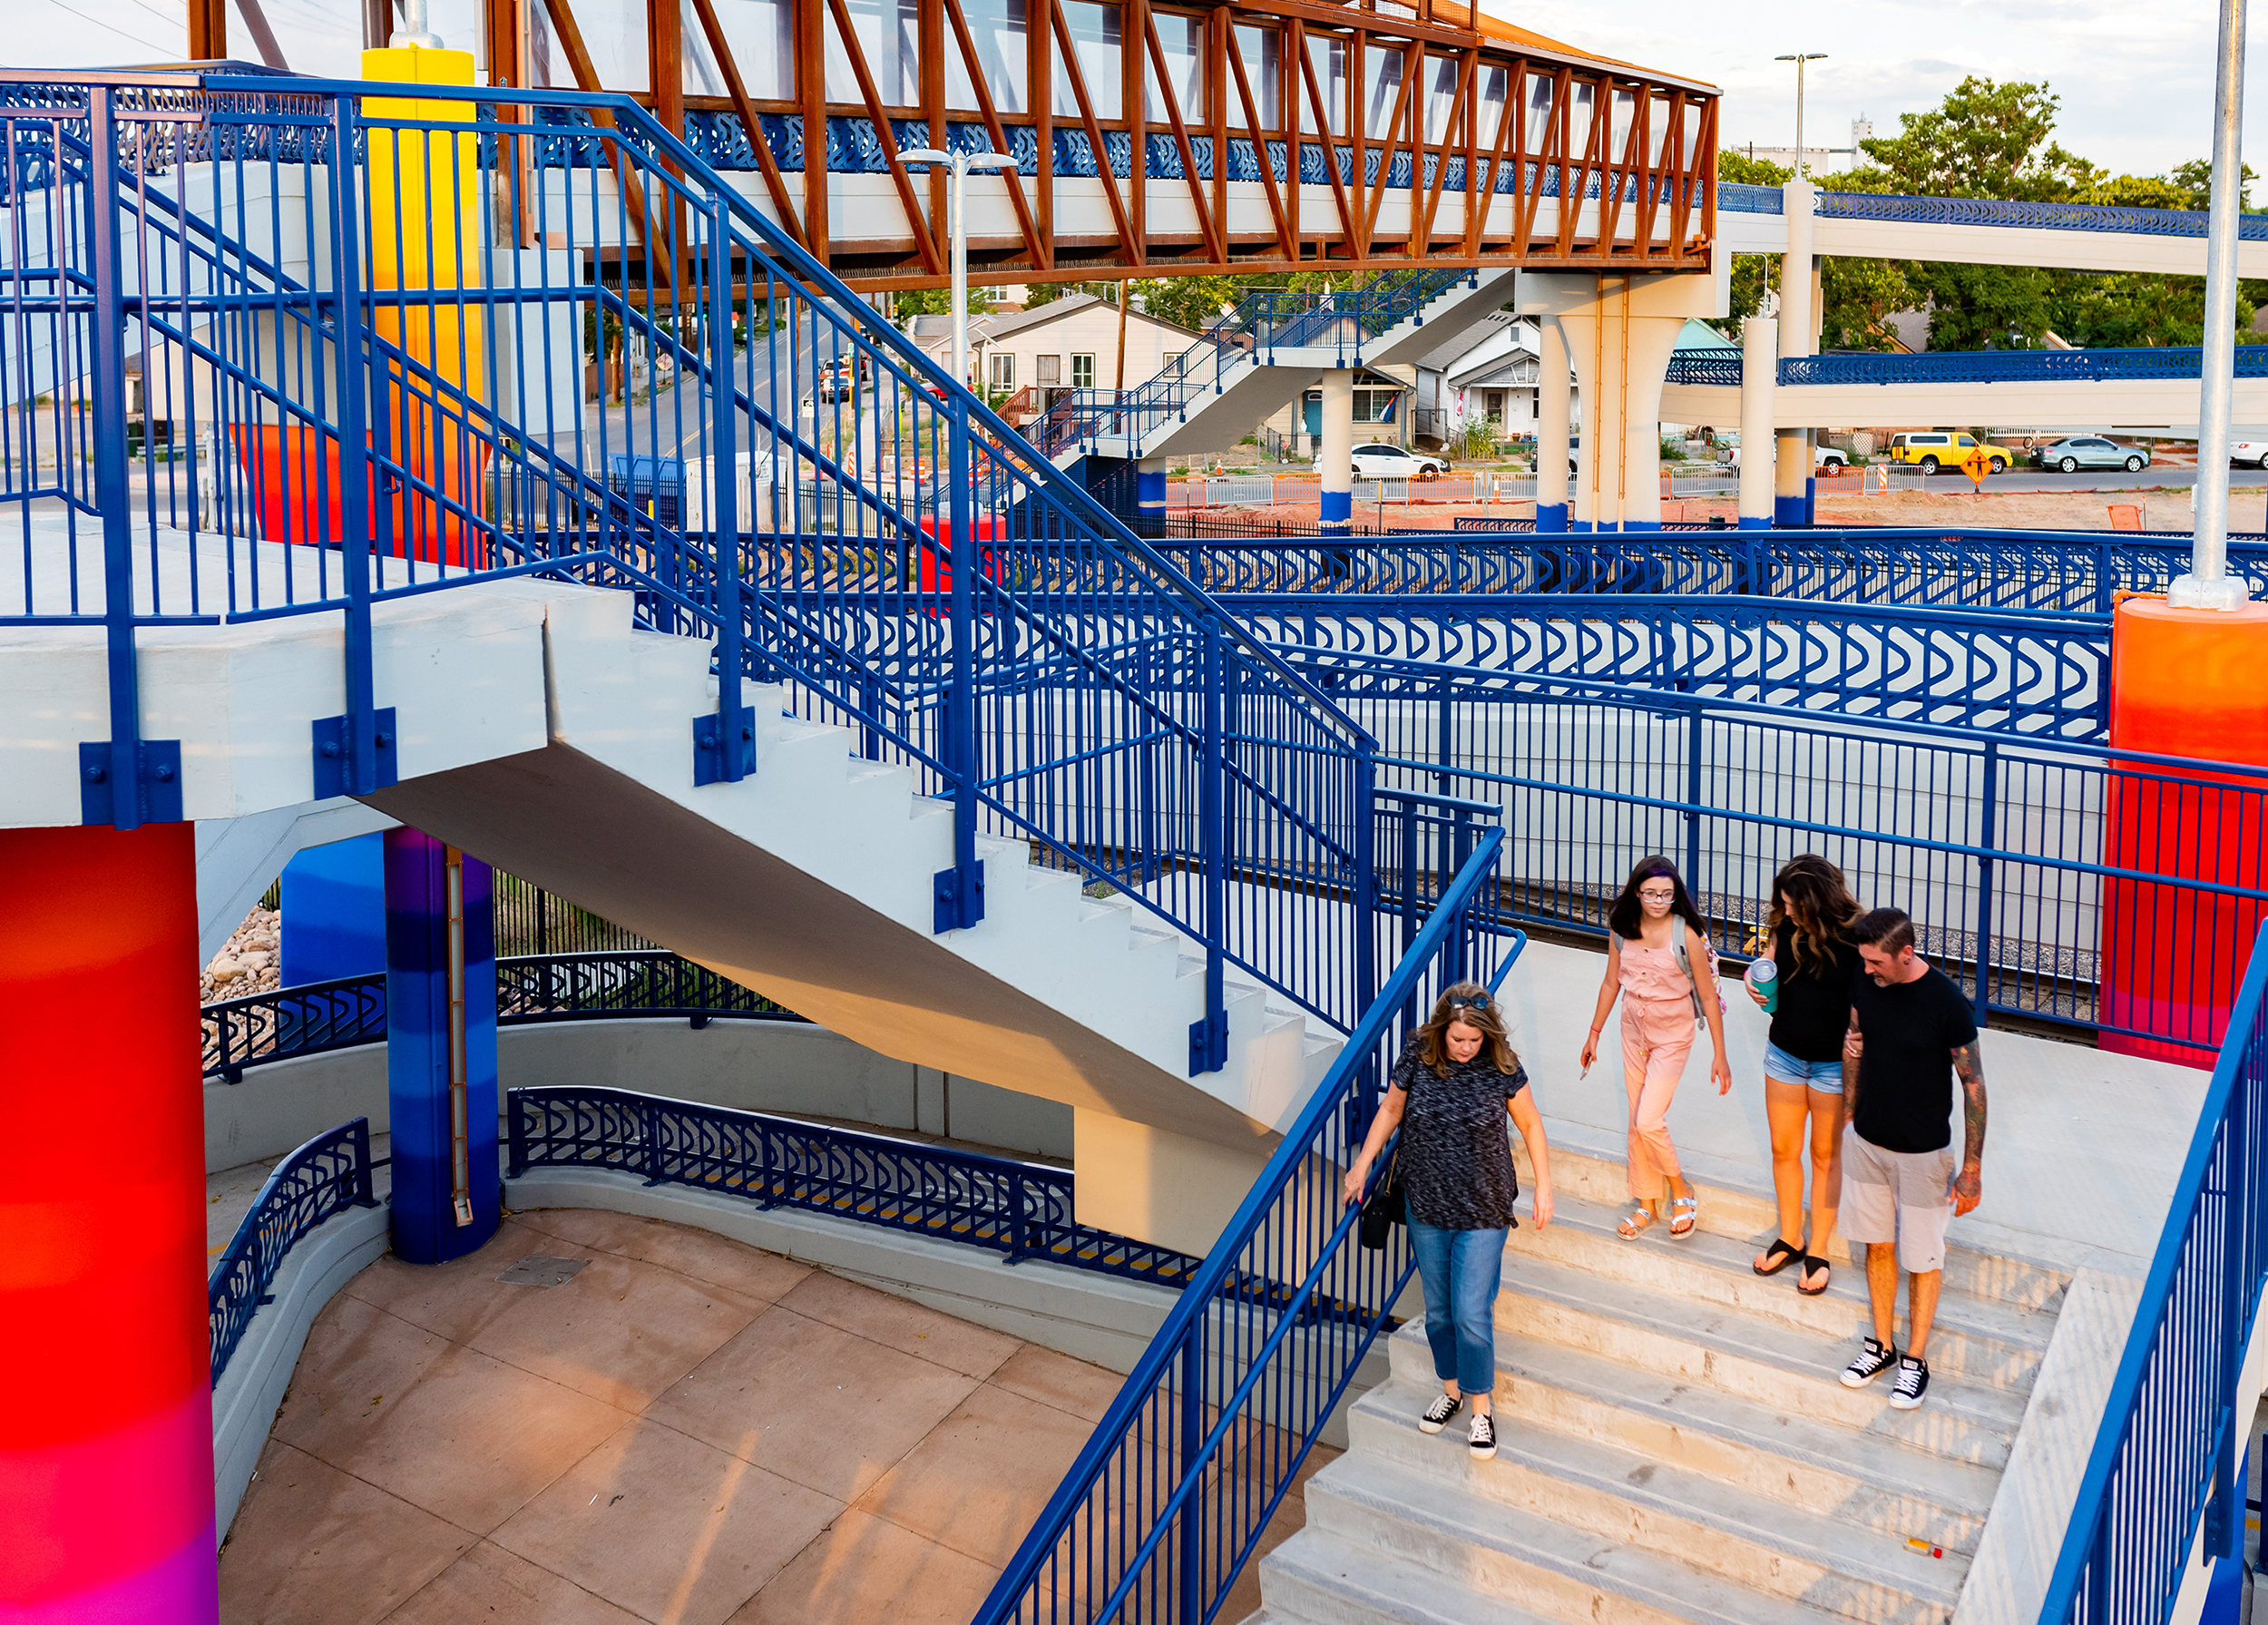 The 47th and York Pedestrian Bridge provides ADA-compliant pedestrian and cyclist crossing across the UPRR tracks.